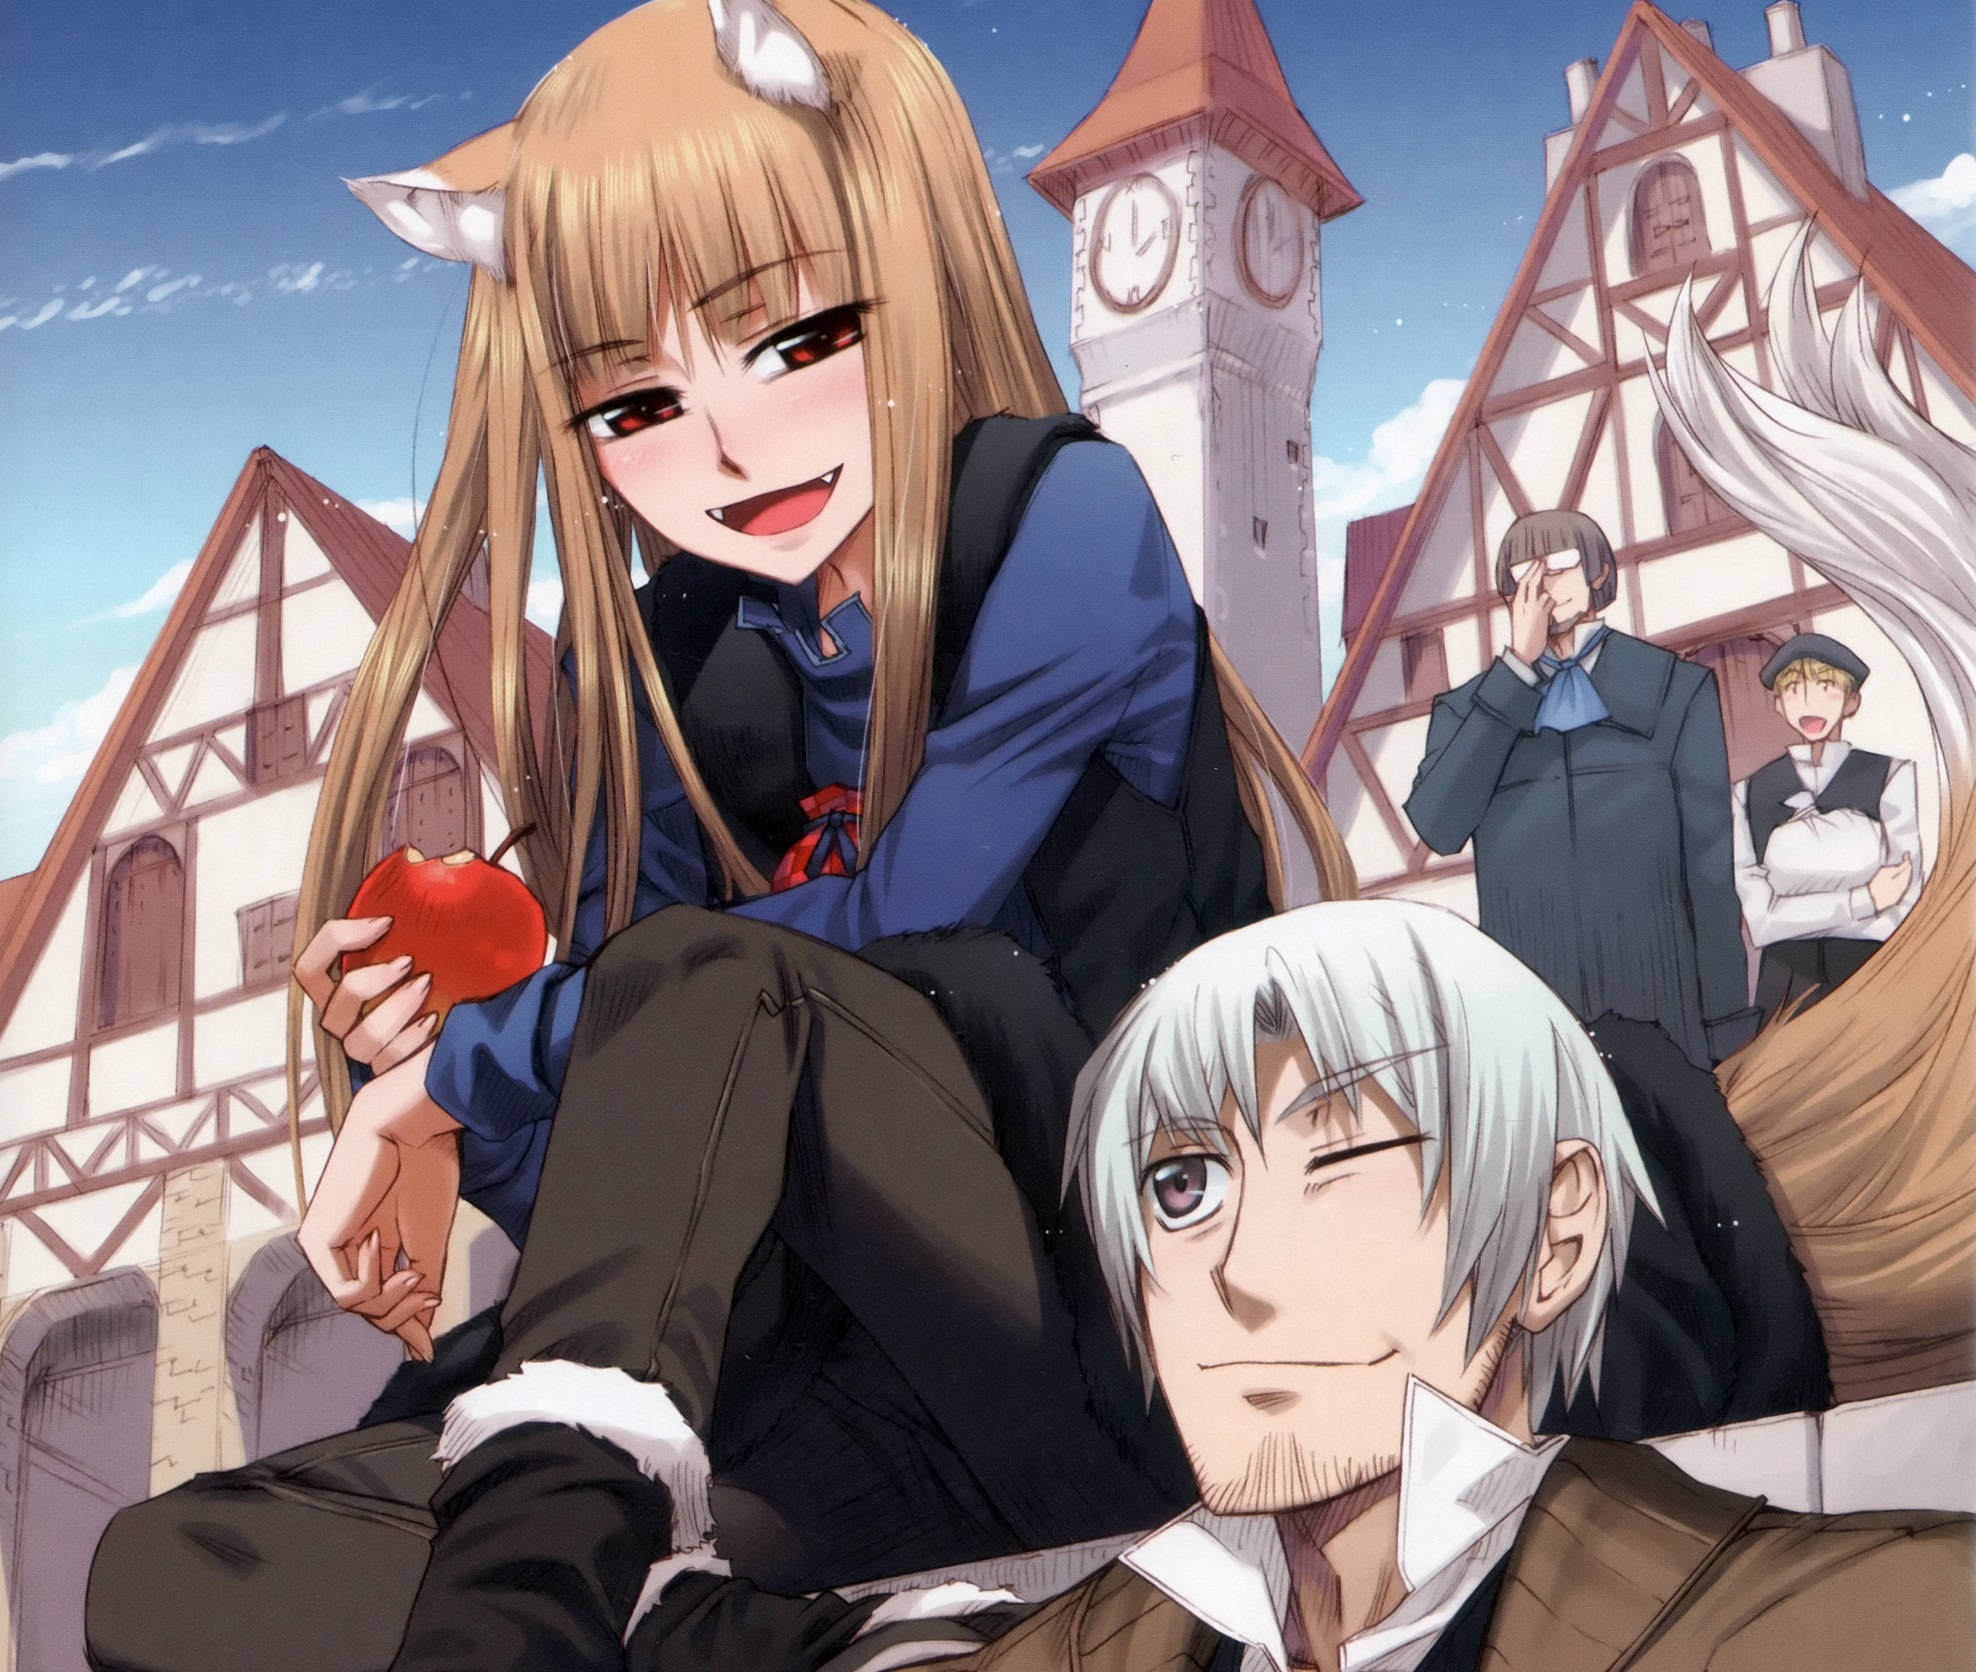 Anime Spice and Wolf HD Wallpaper | Background Image